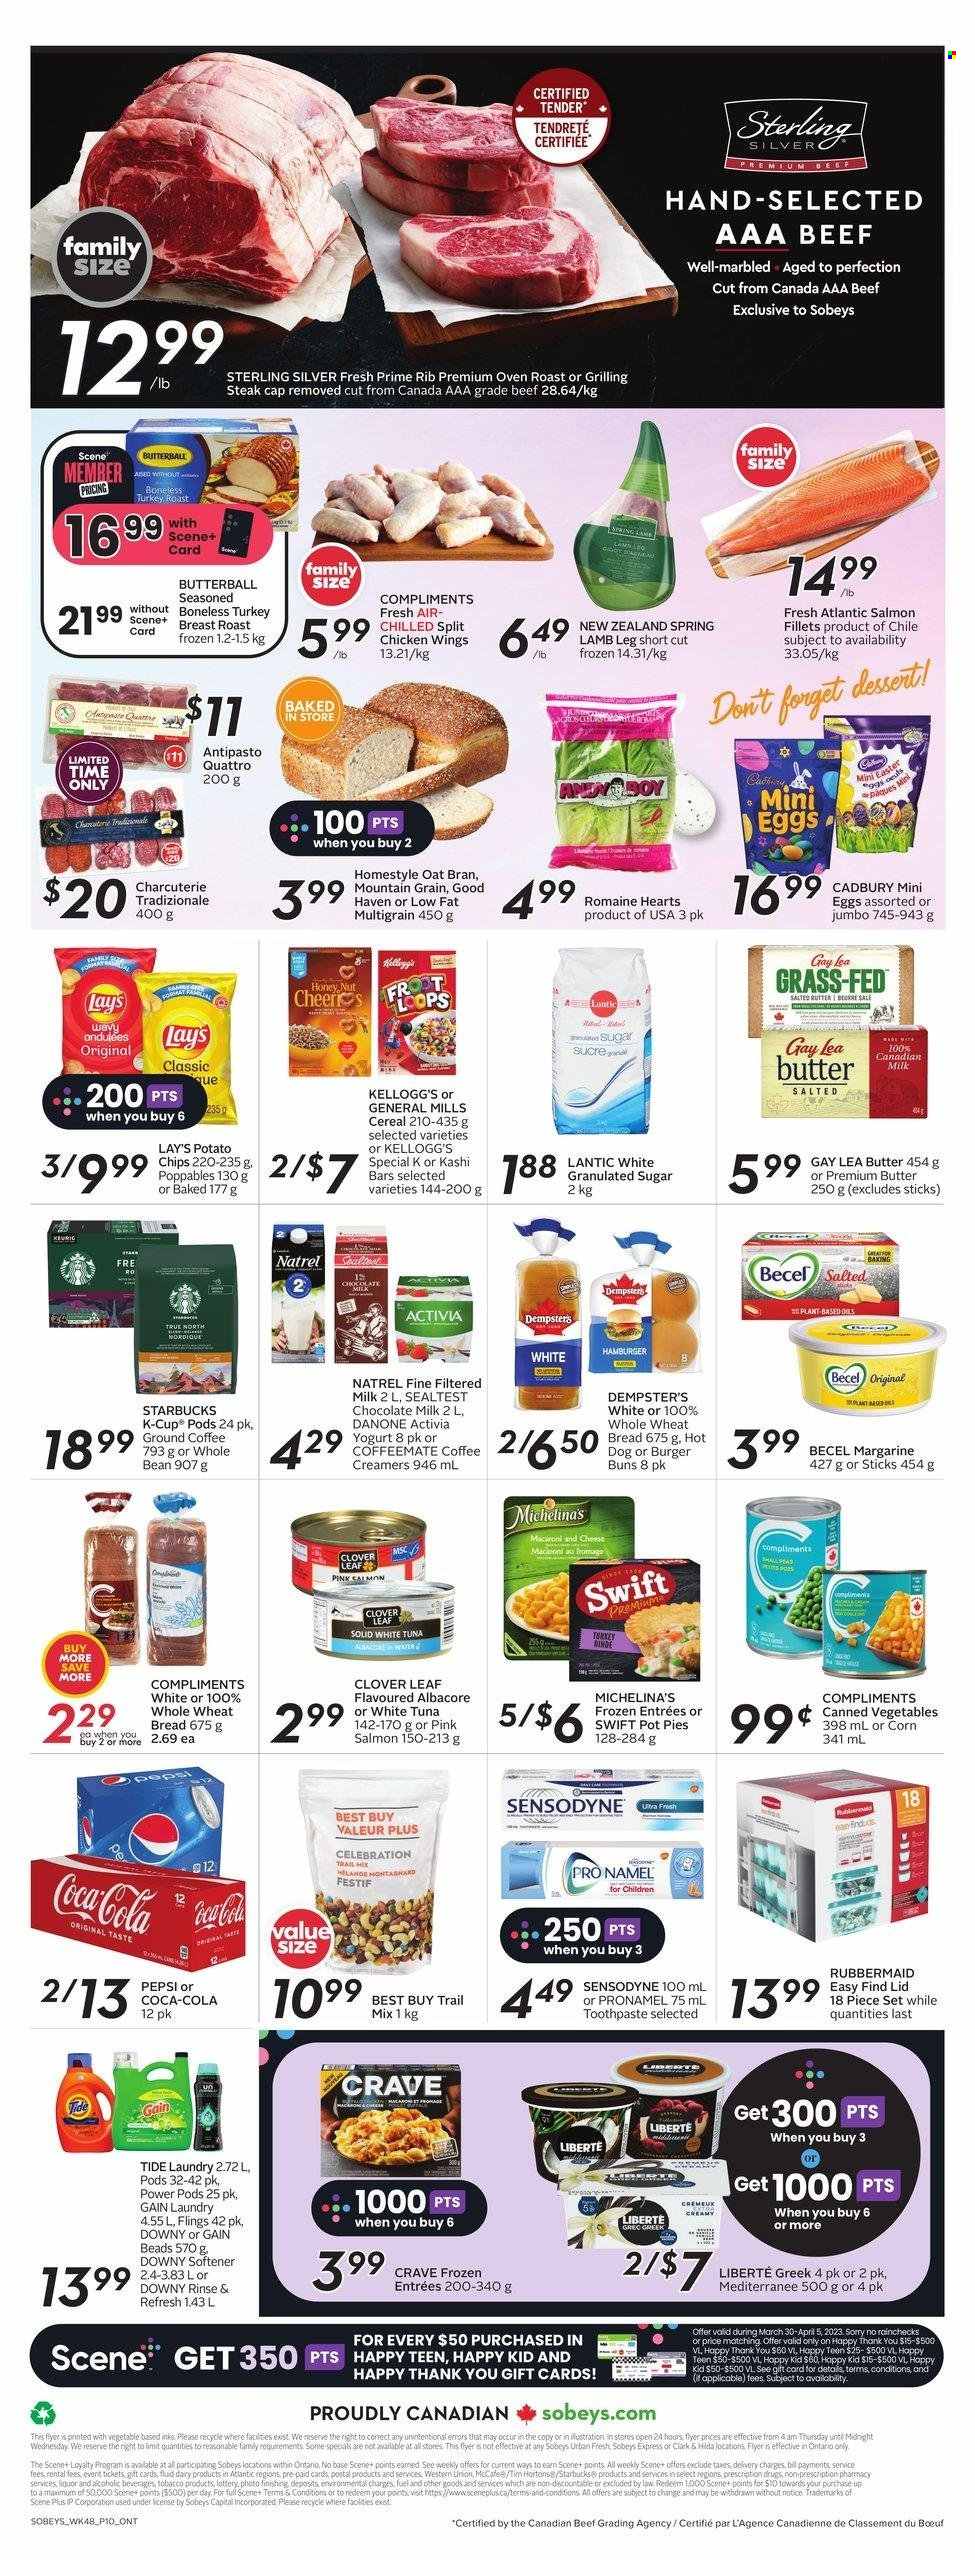 thumbnail - Sobeys Flyer - March 30, 2023 - April 05, 2023 - Sales products - wheat bread, buns, burger buns, pot pie, corn, salmon, salmon fillet, tuna, hot dog, turkey roast, roast, Butterball, yoghurt, Clover, Activia, milk, margarine, chicken wings, milk chocolate, Celebration, Kellogg's, Cadbury, chocolate egg, potato chips, Lay’s, granulated sugar, sugar, oats, canned vegetables, cereals, trail mix, Coca-Cola, Pepsi, coffee, ground coffee, coffee capsules, Starbucks, McCafe, K-Cups, Keurig, turkey breast, chicken, turkey, steak, lamb meat, lamb leg, Gain, Tide, fabric softener, Downy Laundry, toothpaste, Danone, Sensodyne. Page 2.